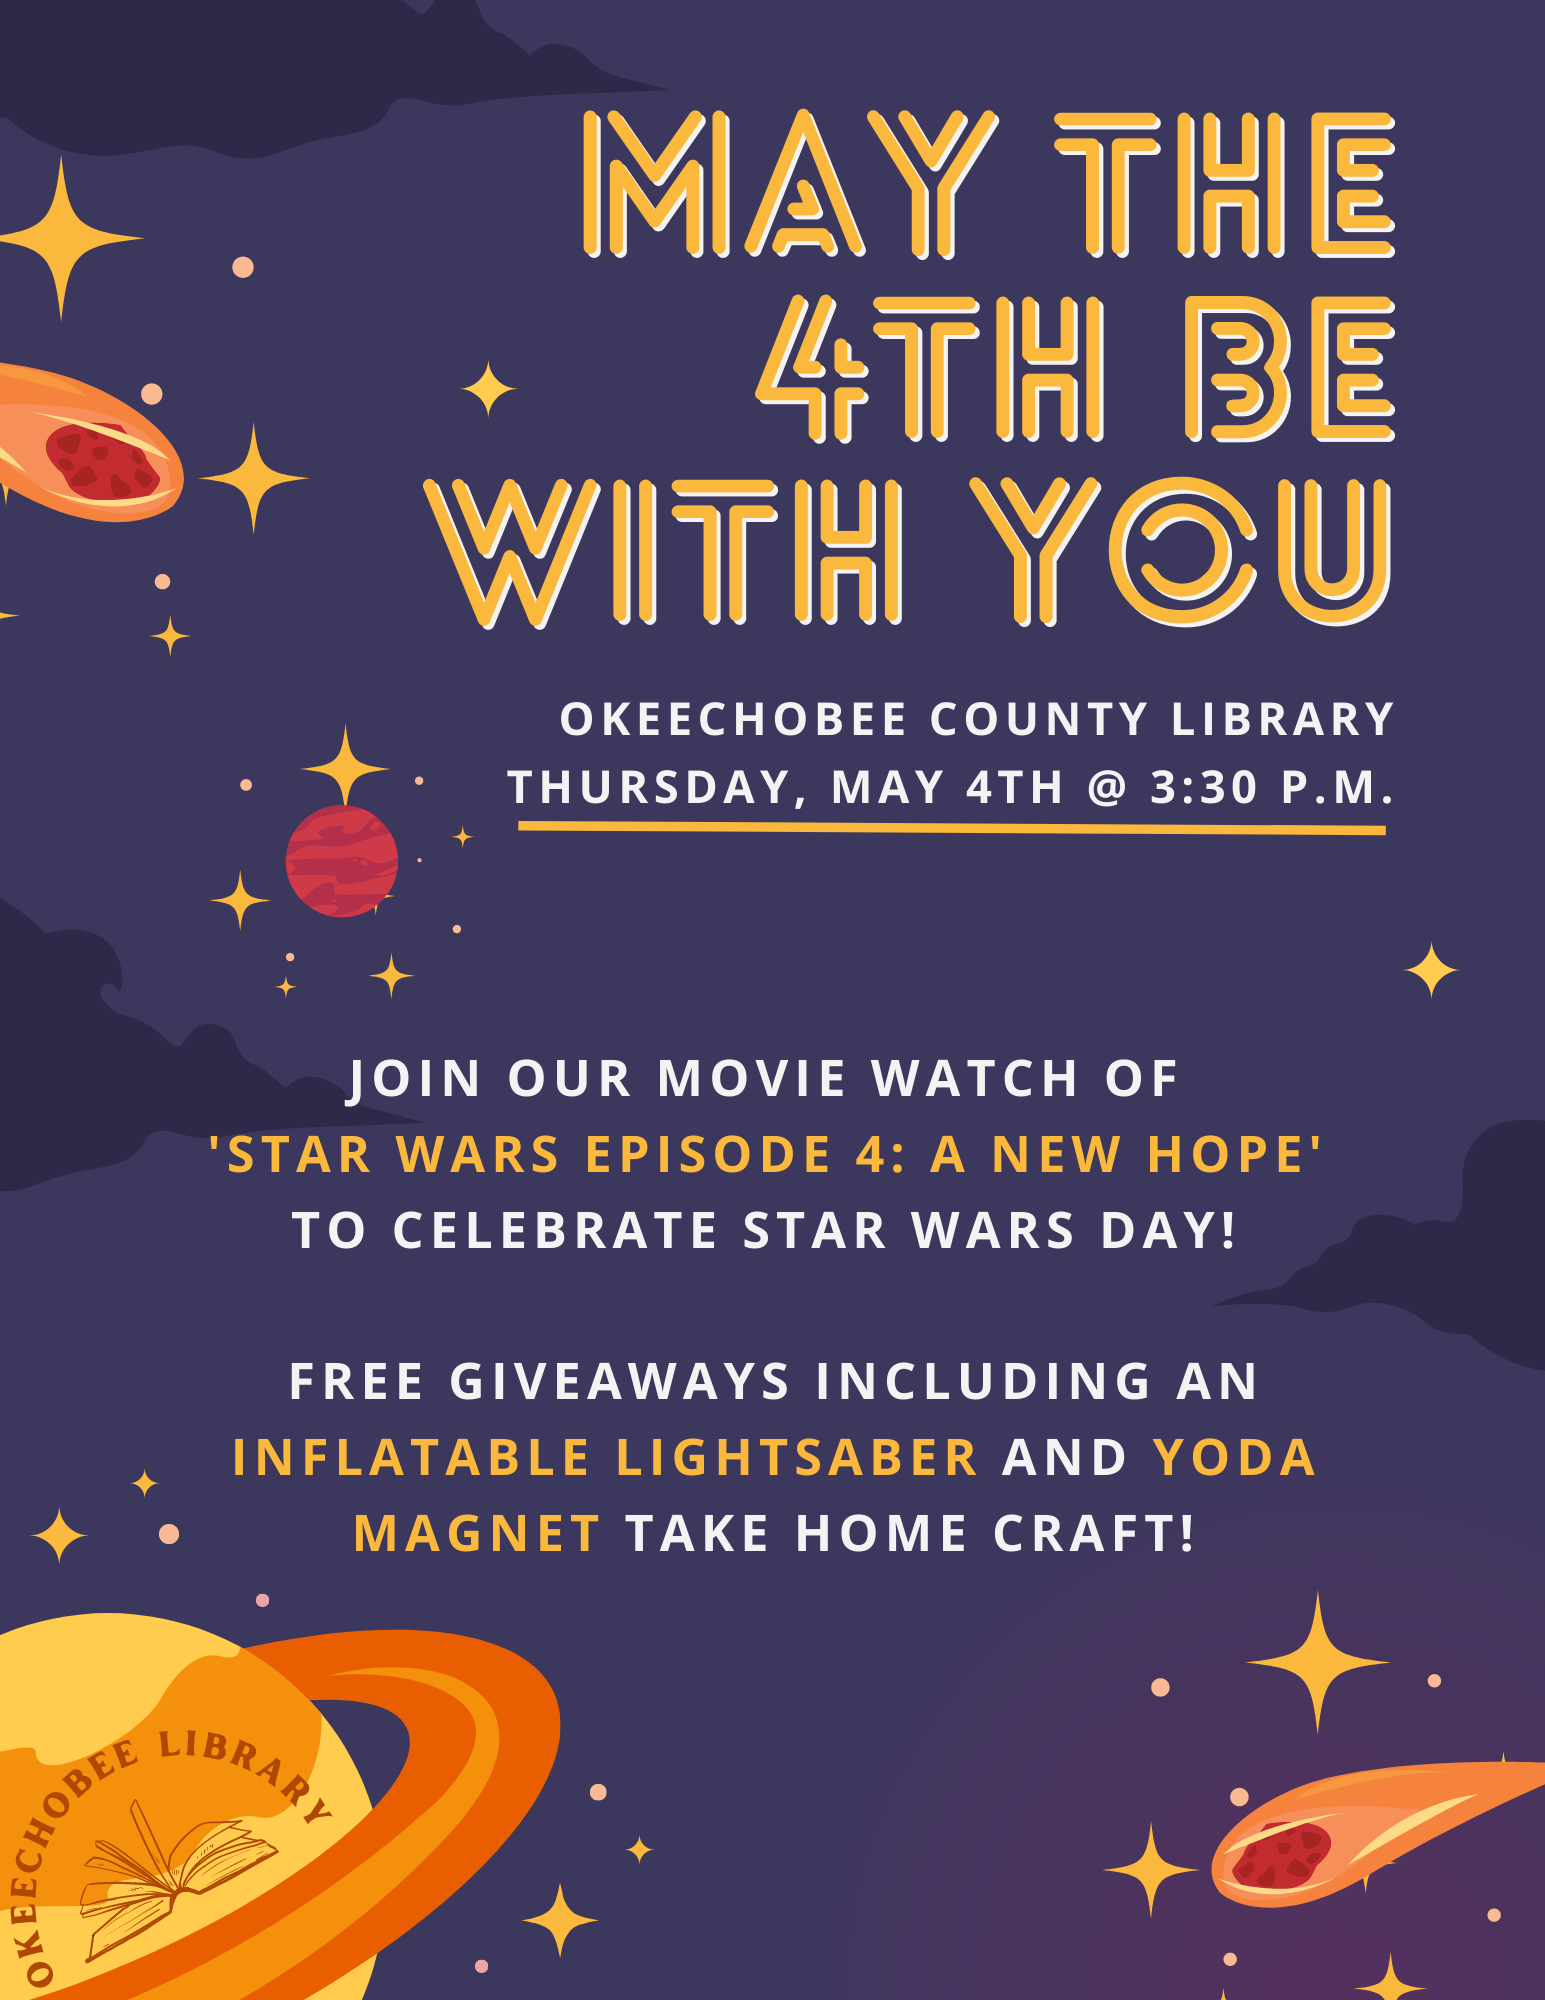 Join our movie watch of 'Star Wars Episode 4: A New Hope' TO CELEBRATE STAR WARS DAY at the Okeechobee County Library Thursday, May 4th @ 3:30 p.m.